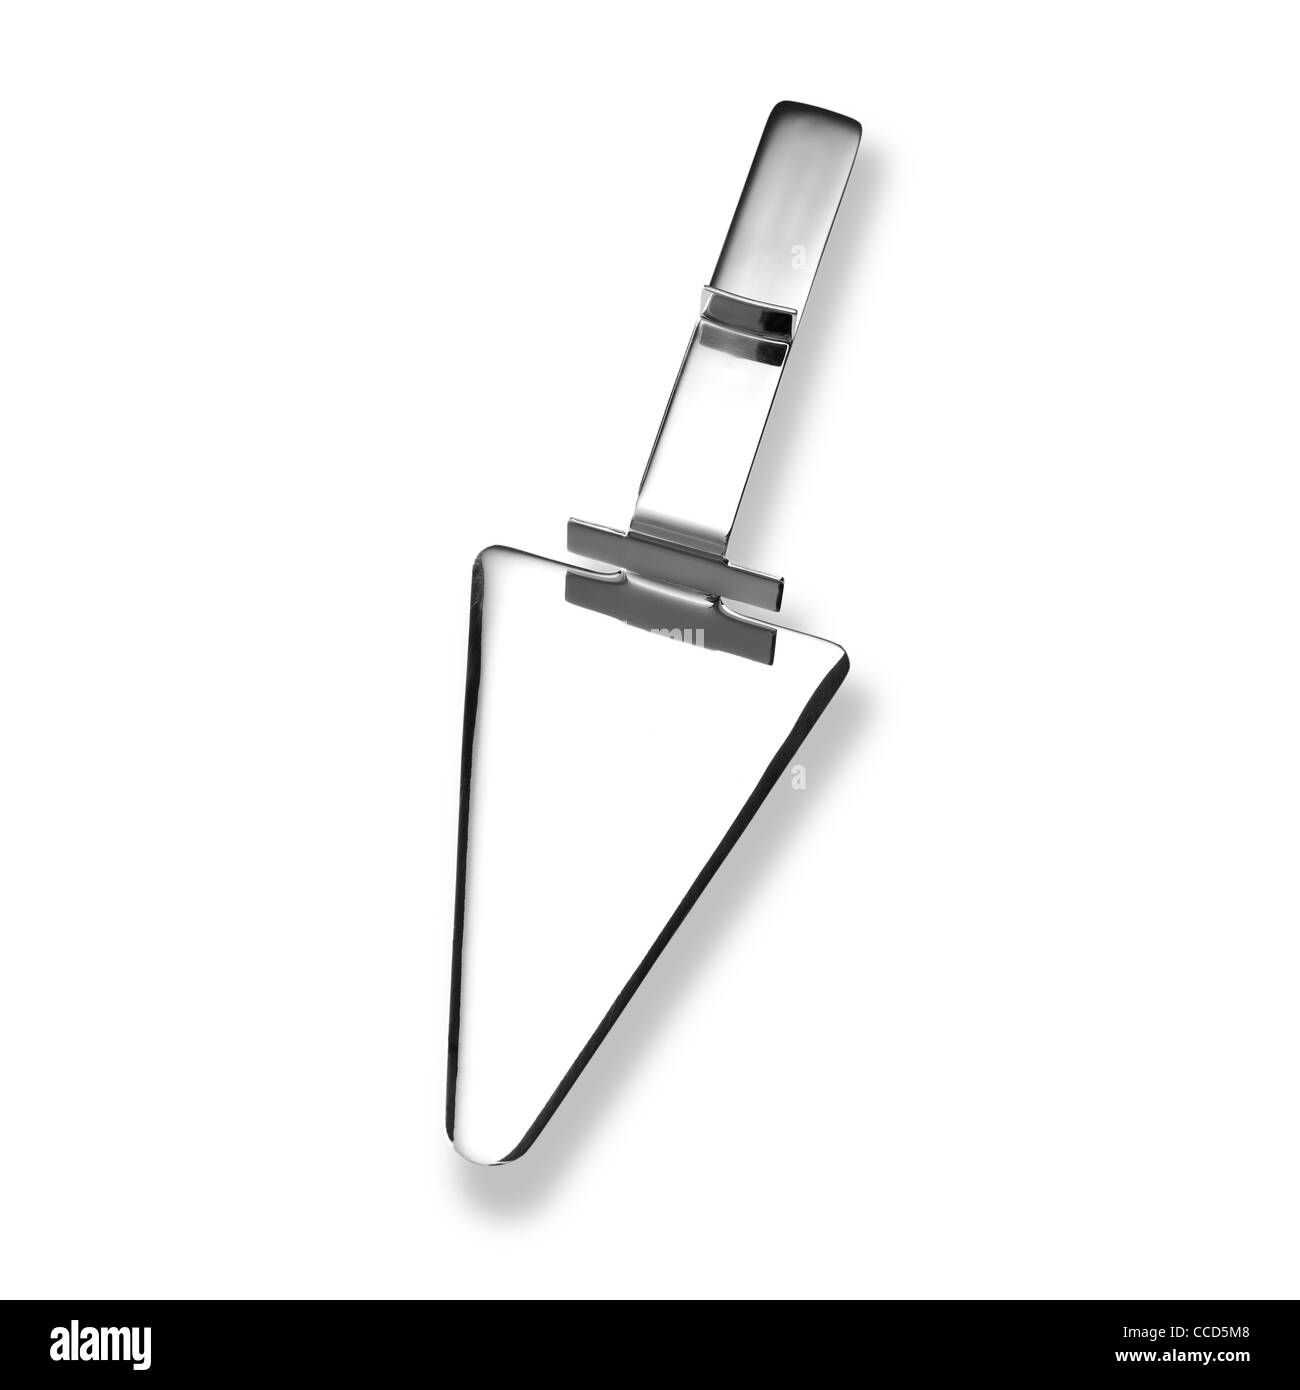 Still life shot of a stainless steel kitchen implement or cake slice on a white background with shadow Stock Photo